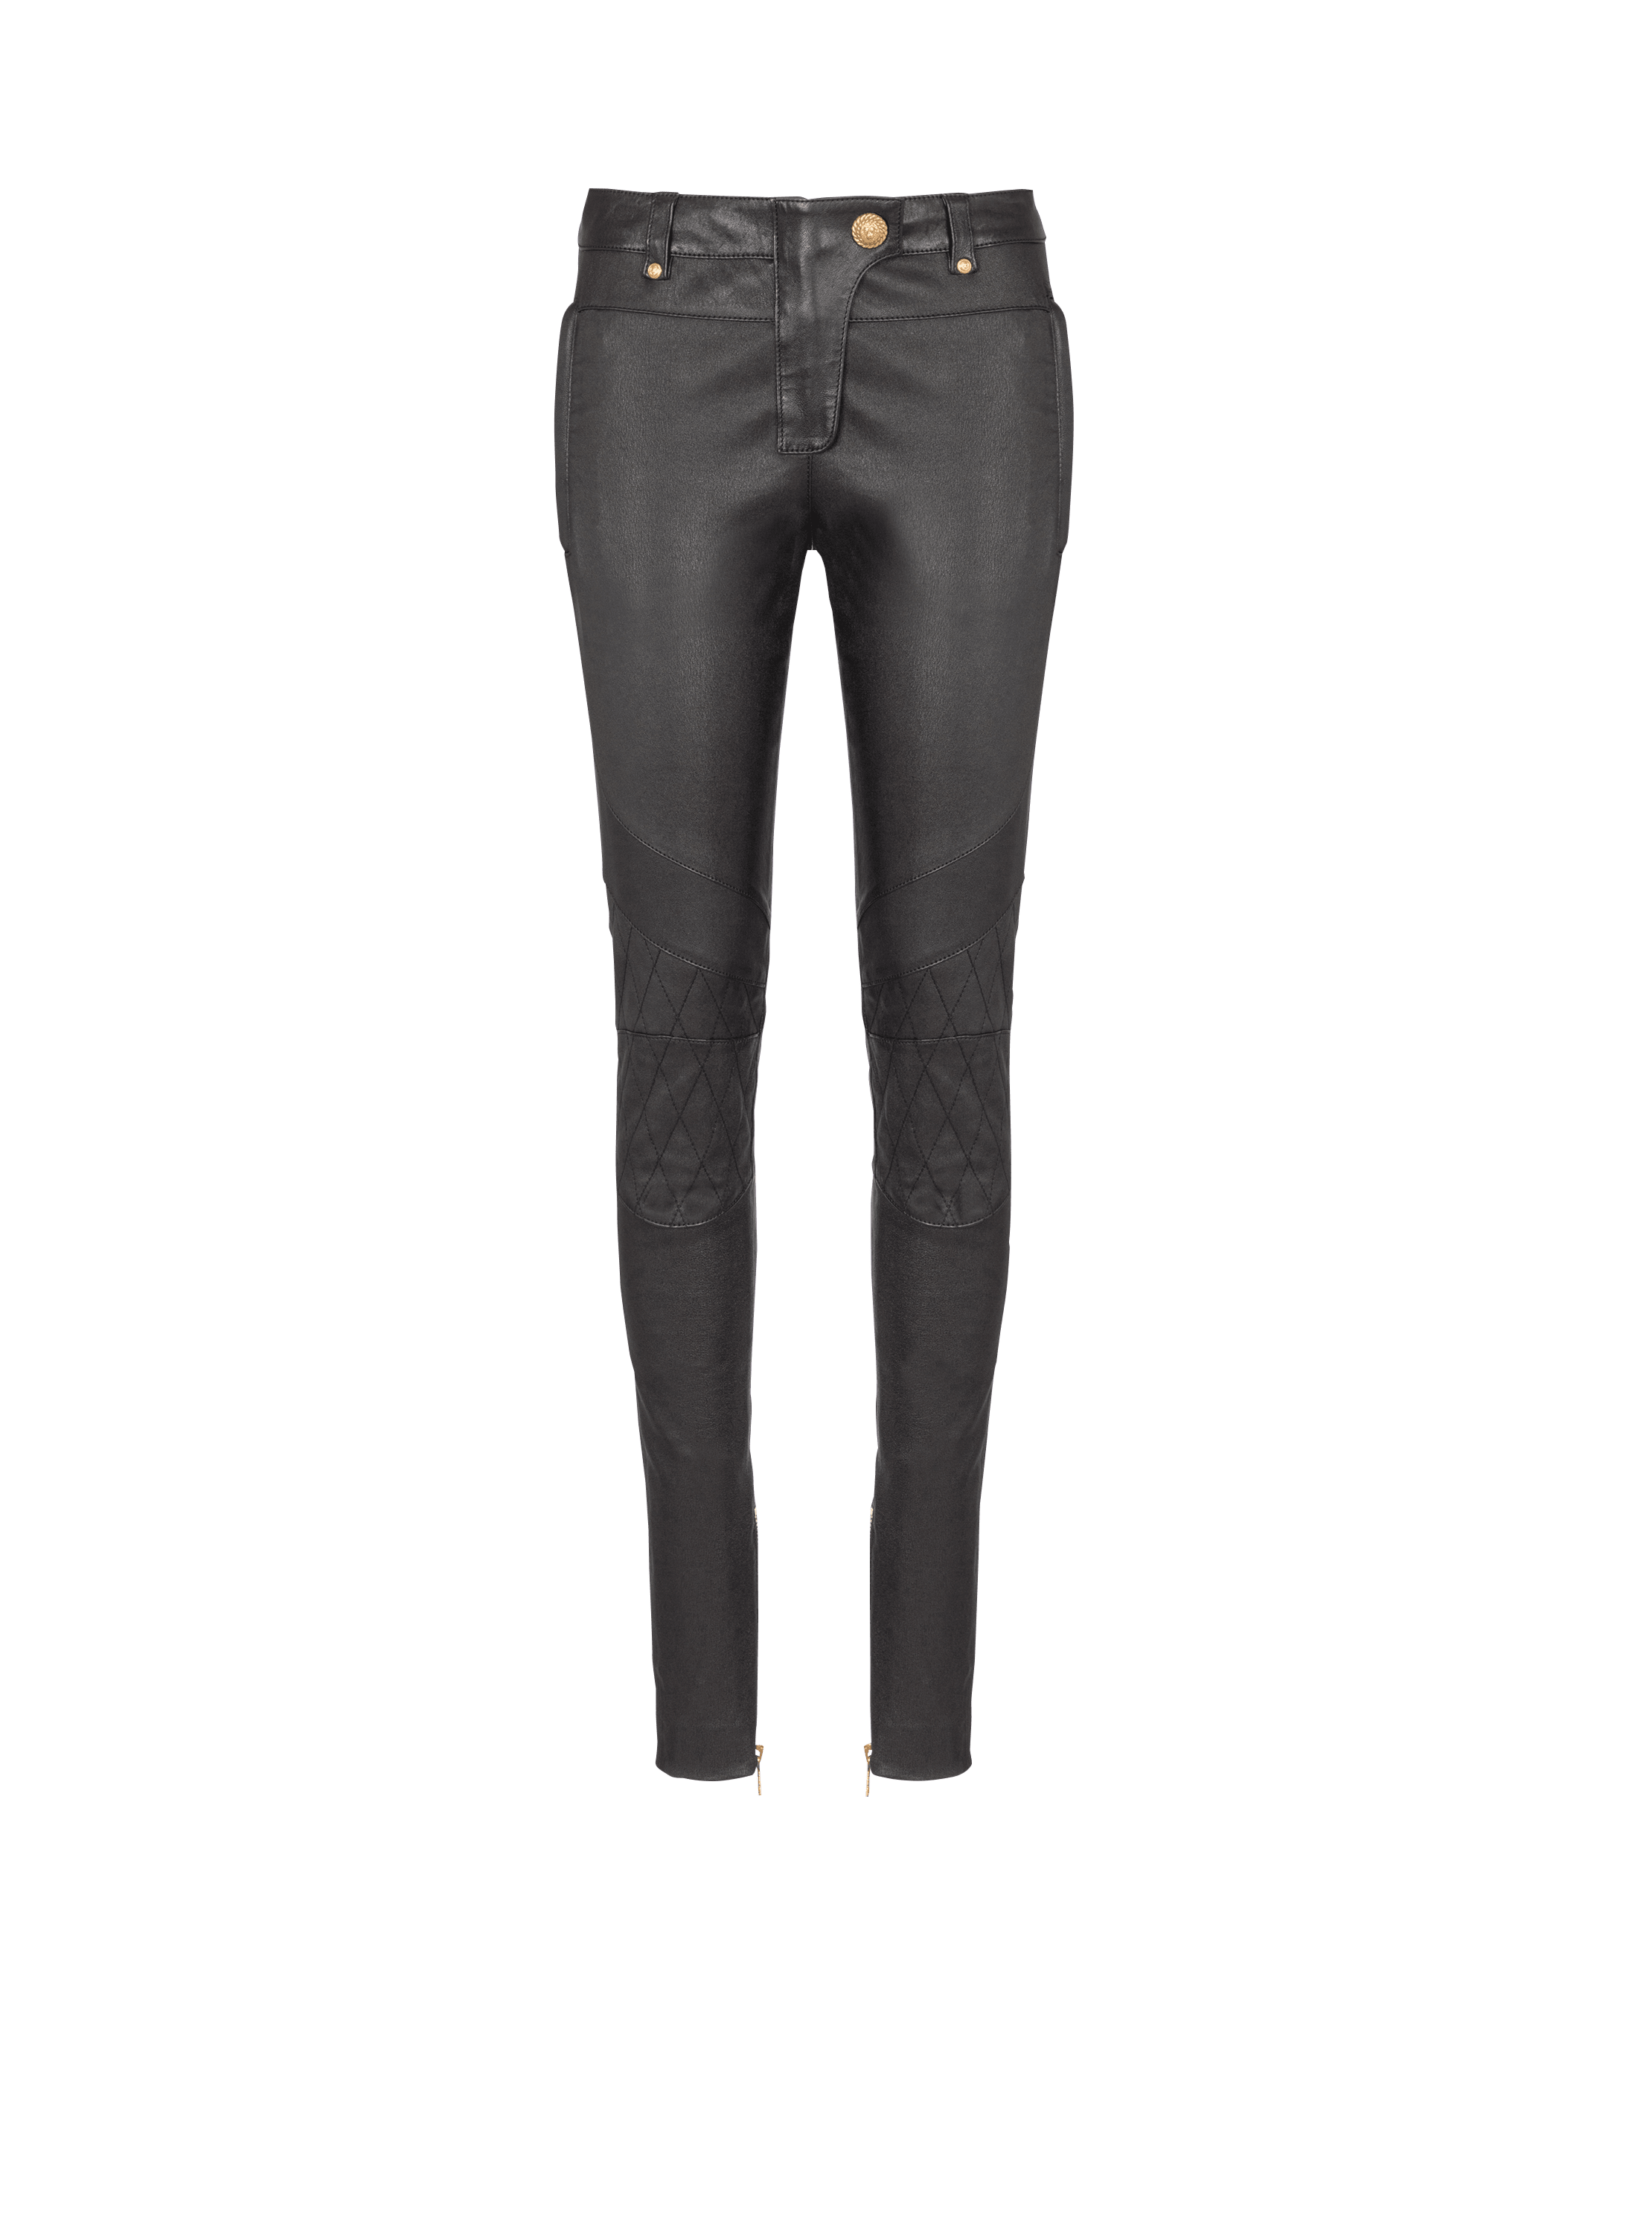 Stretch leather trousers black - Women